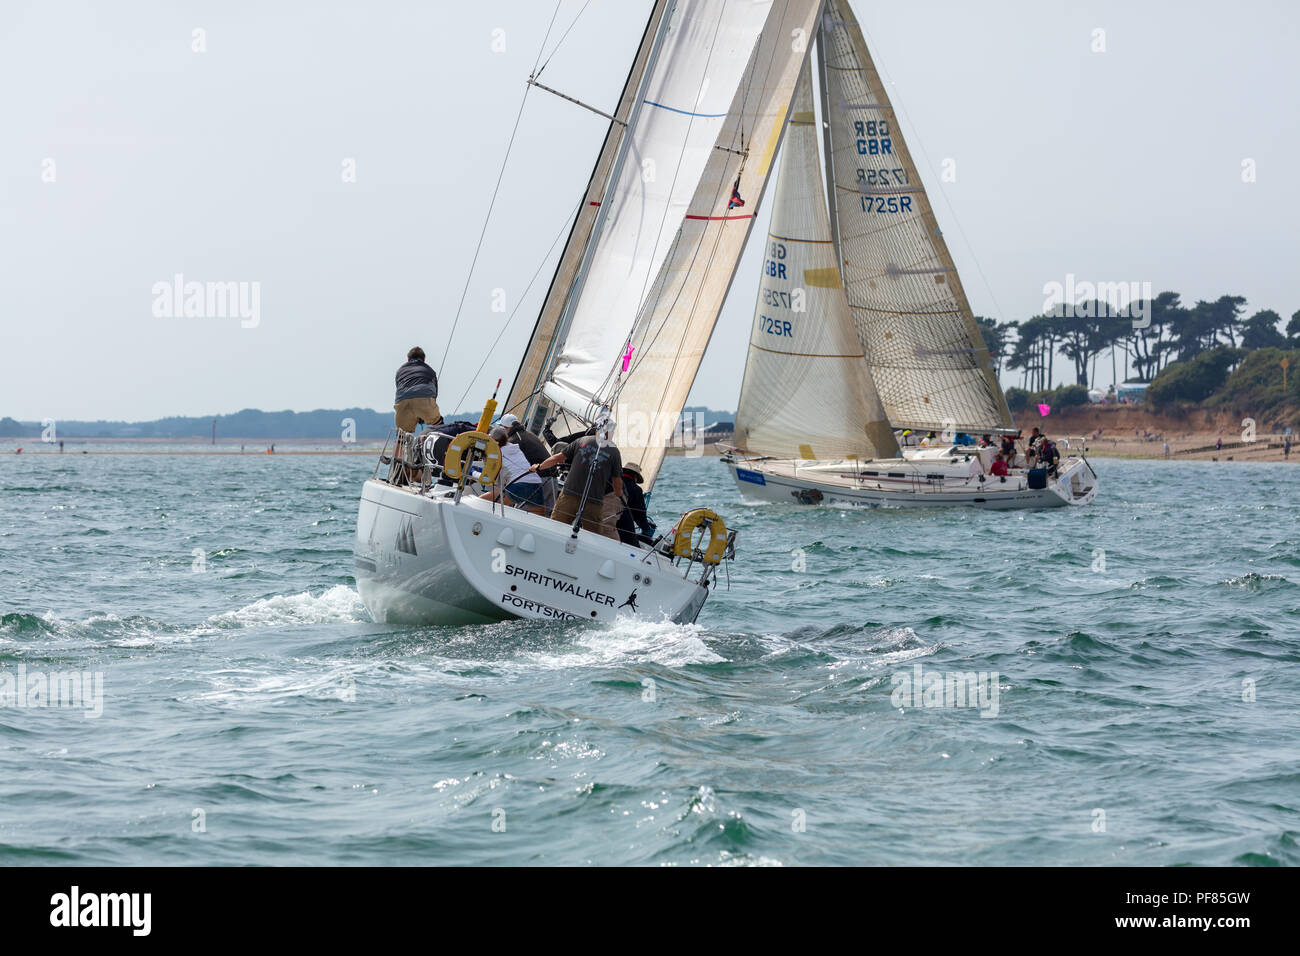 The Solent, Hampshire, UK; 7th August 2018; Two Yachts Race Close to the Shore During the Cowes Week Regatta Stock Photo